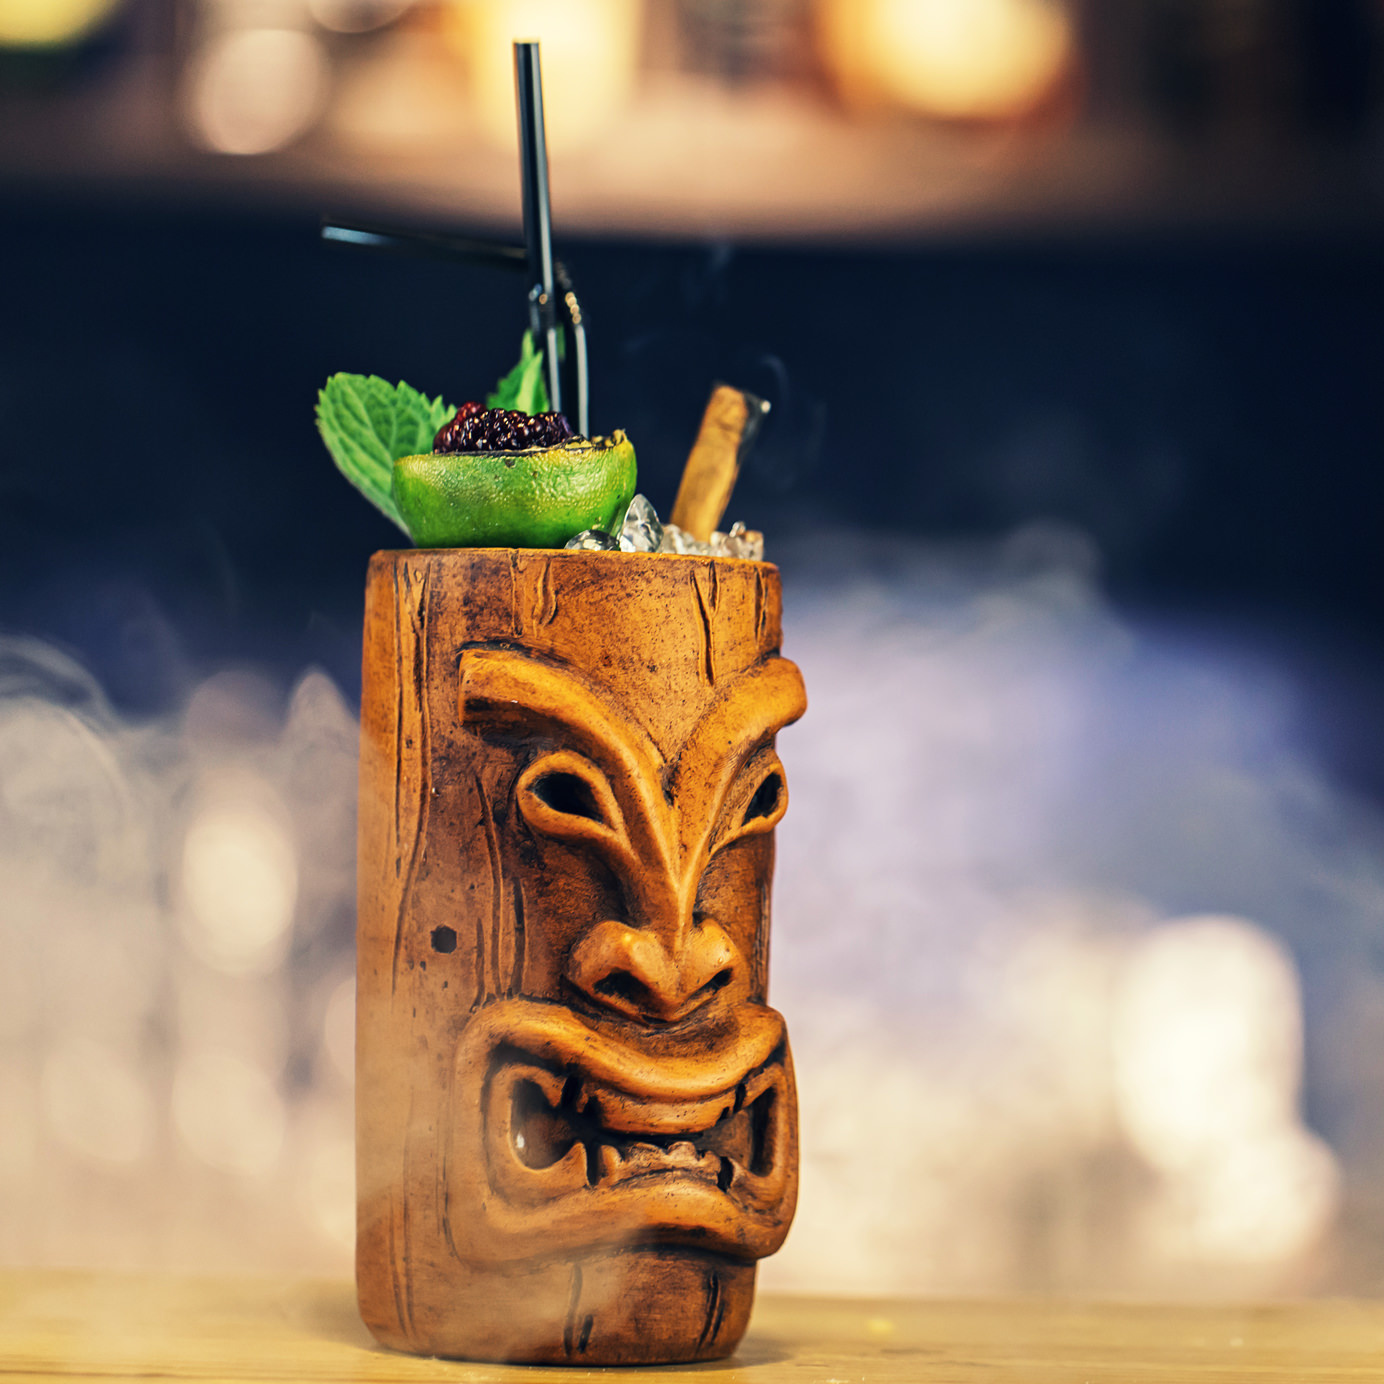 America’s Best Tiki Bars Are Making the Case for Whiskey